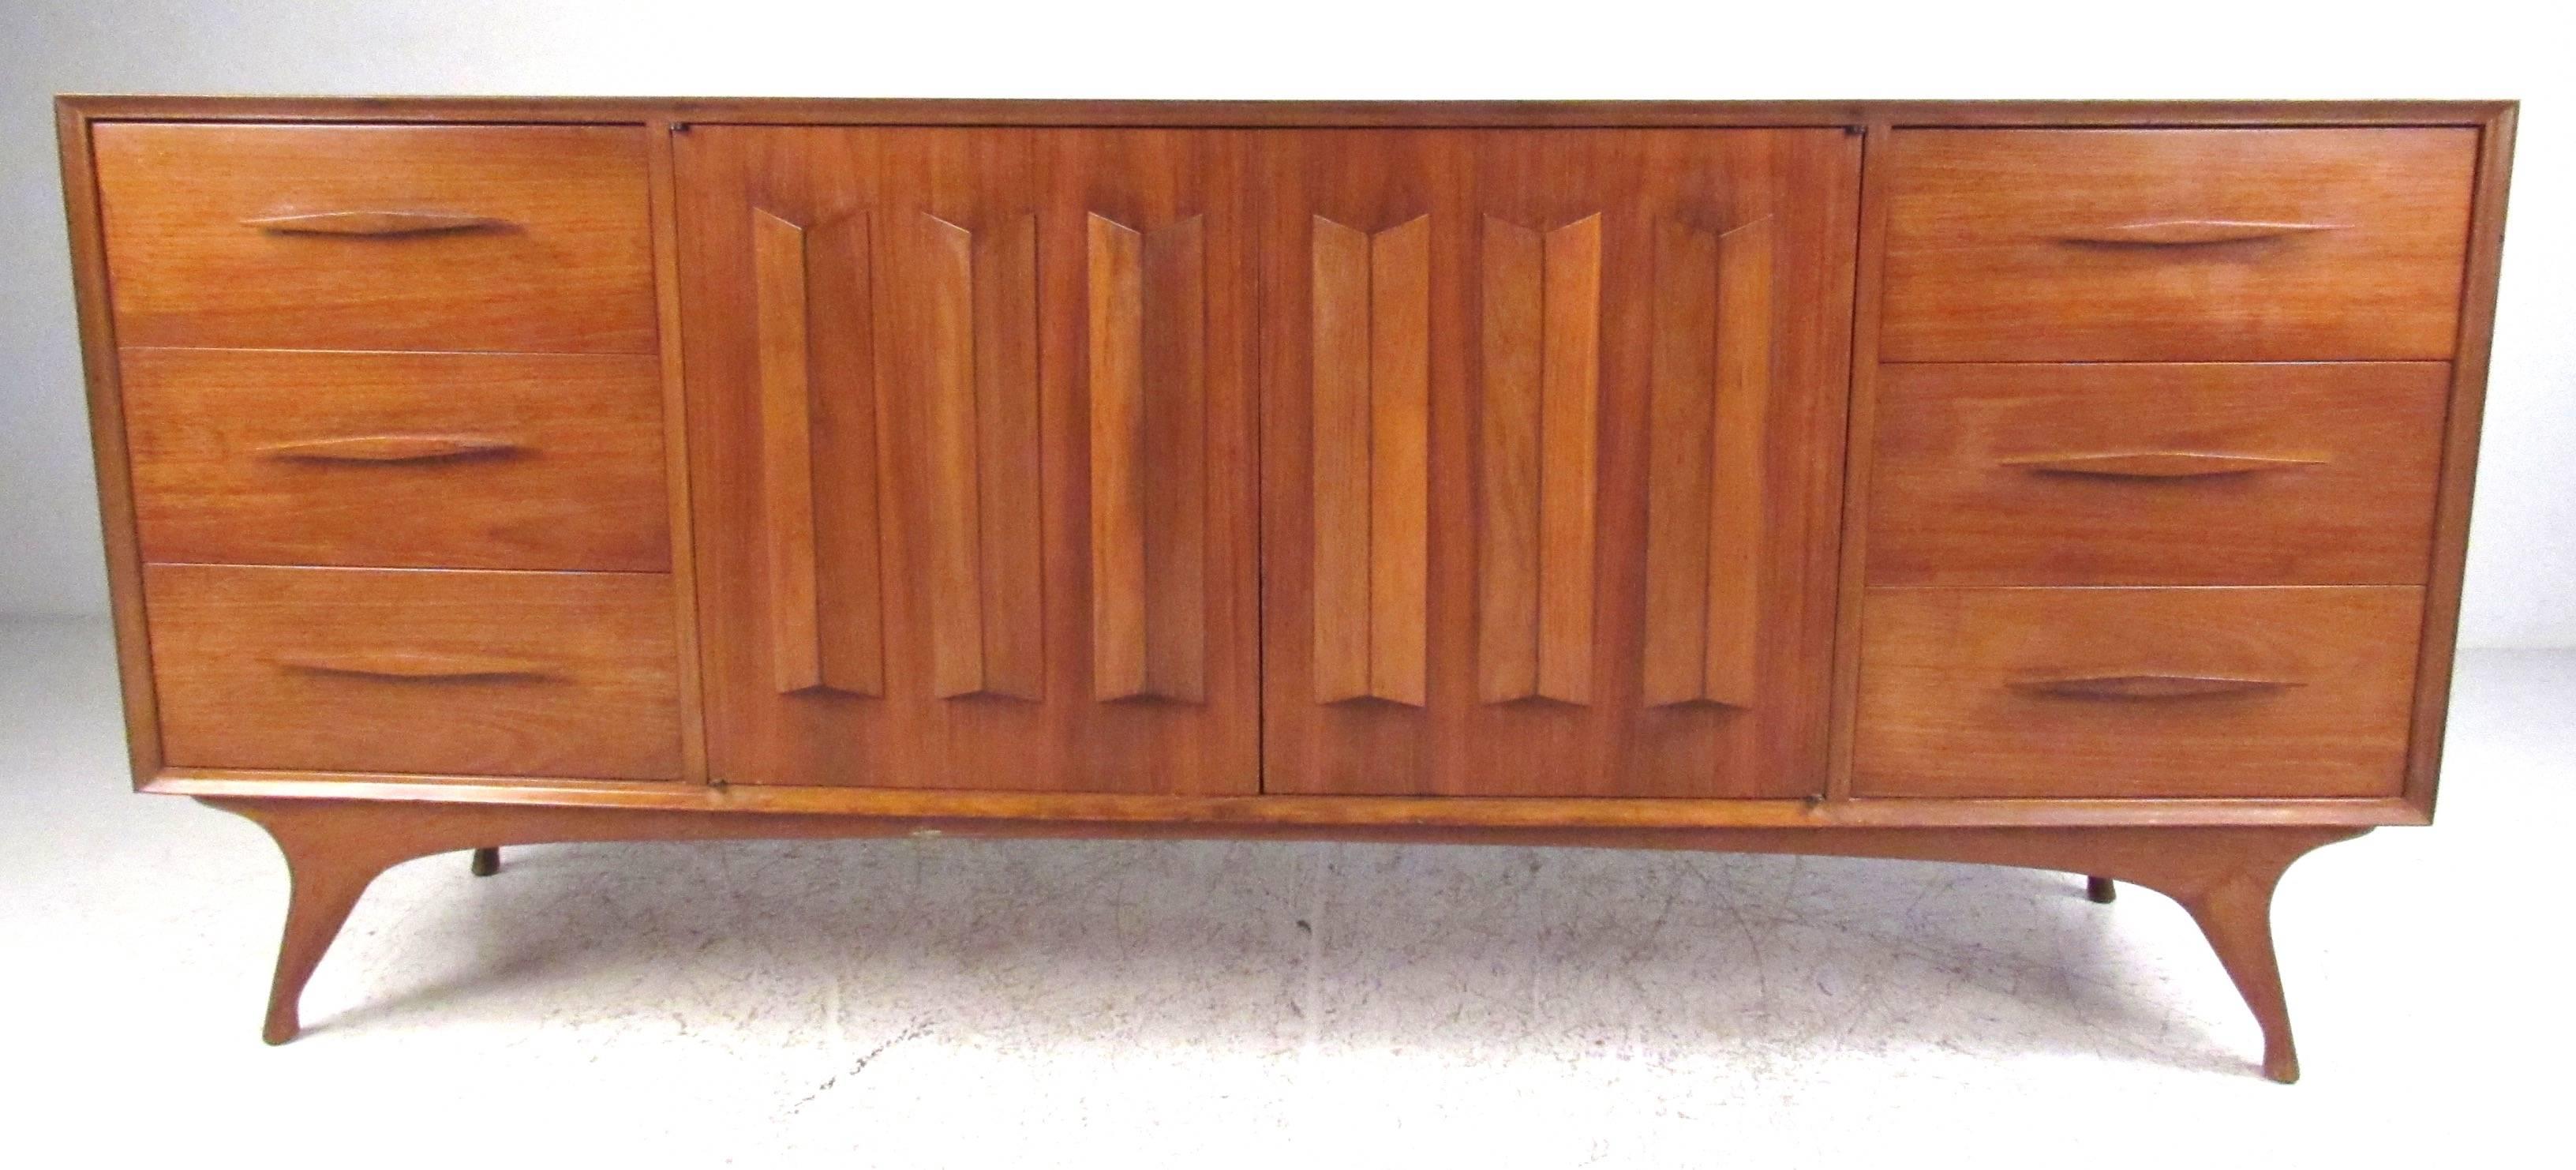 Stylish Mid-Century dresser/credenza with dimensional double doors flanked by storage drawers on each side with carved pulls. Please confirm item location (NY or NJ) with dealer.